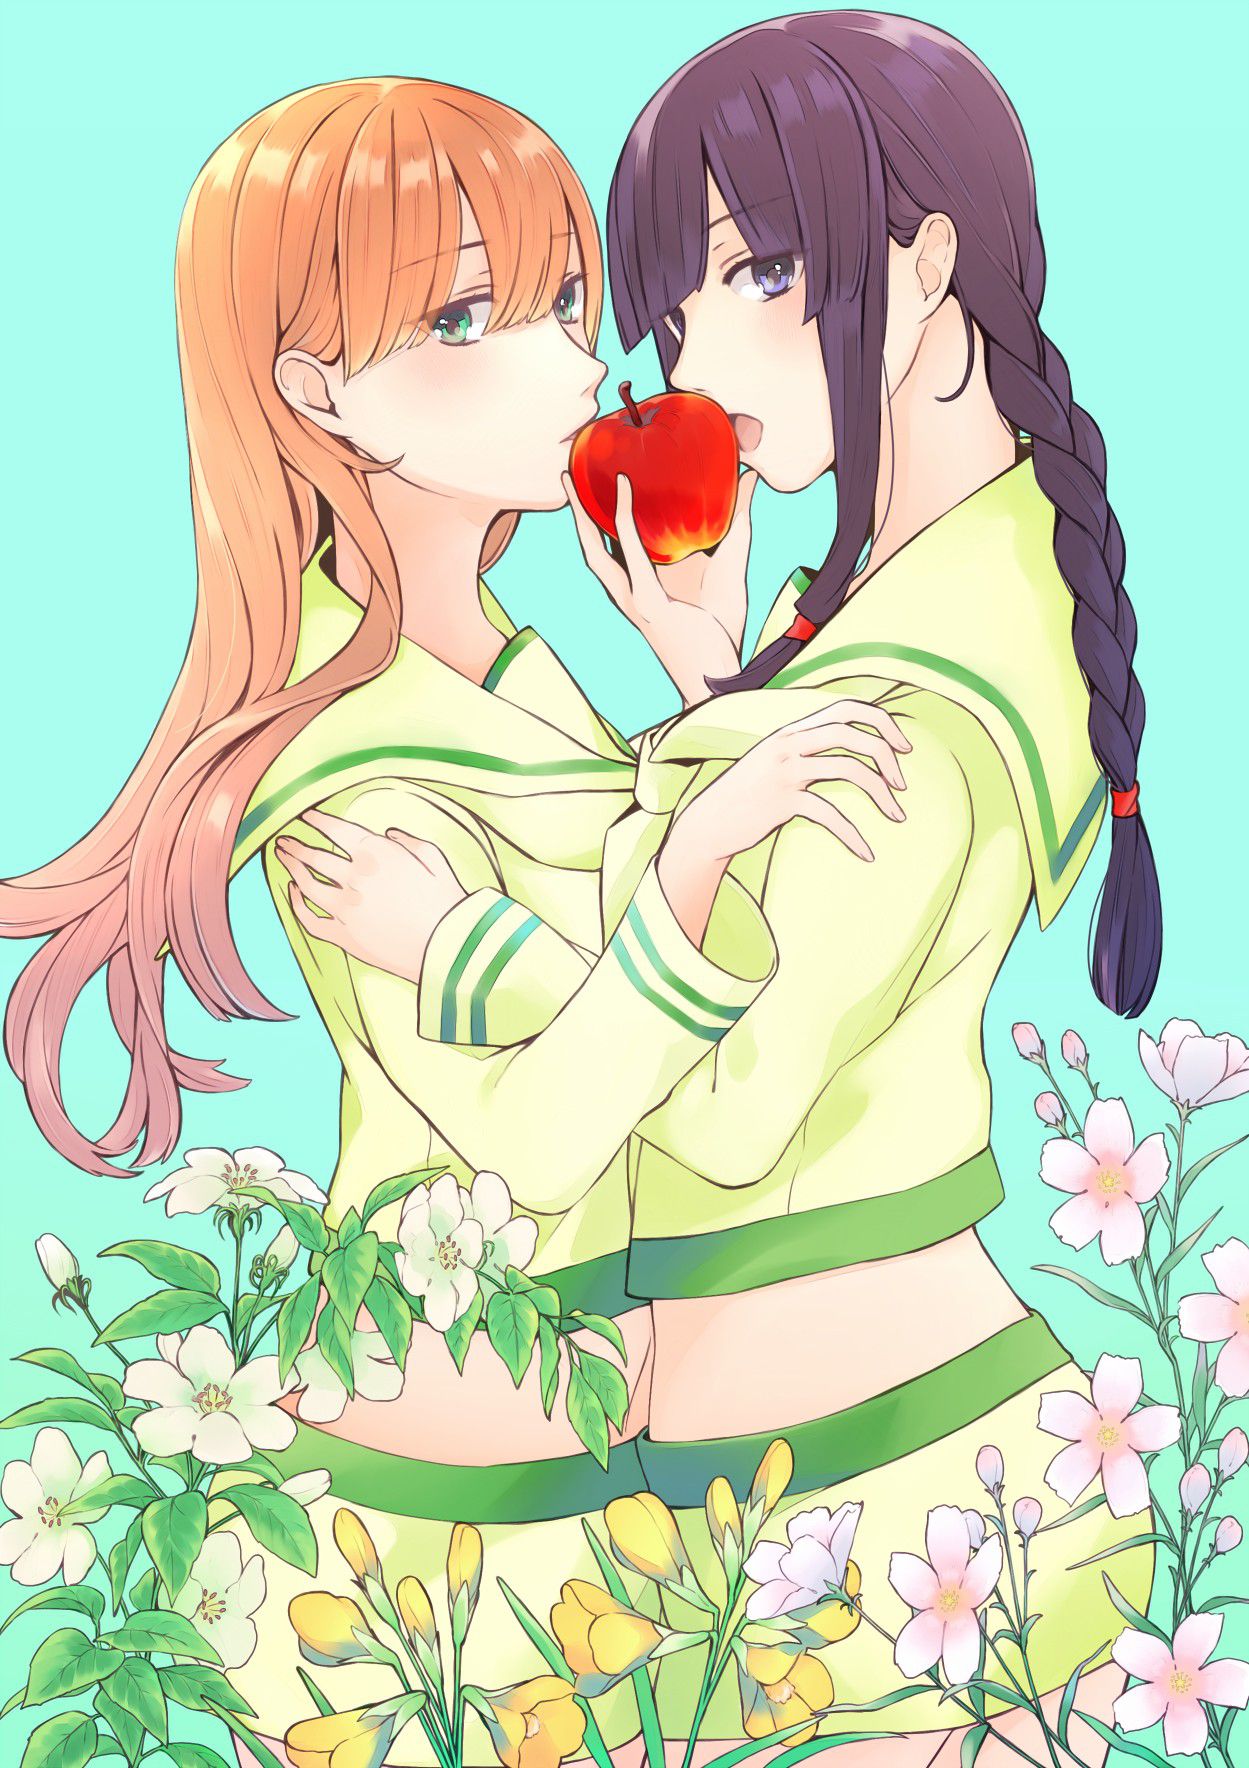 [Secondary] [Ship it] kitakami and ōi was our cute image she wants! 18